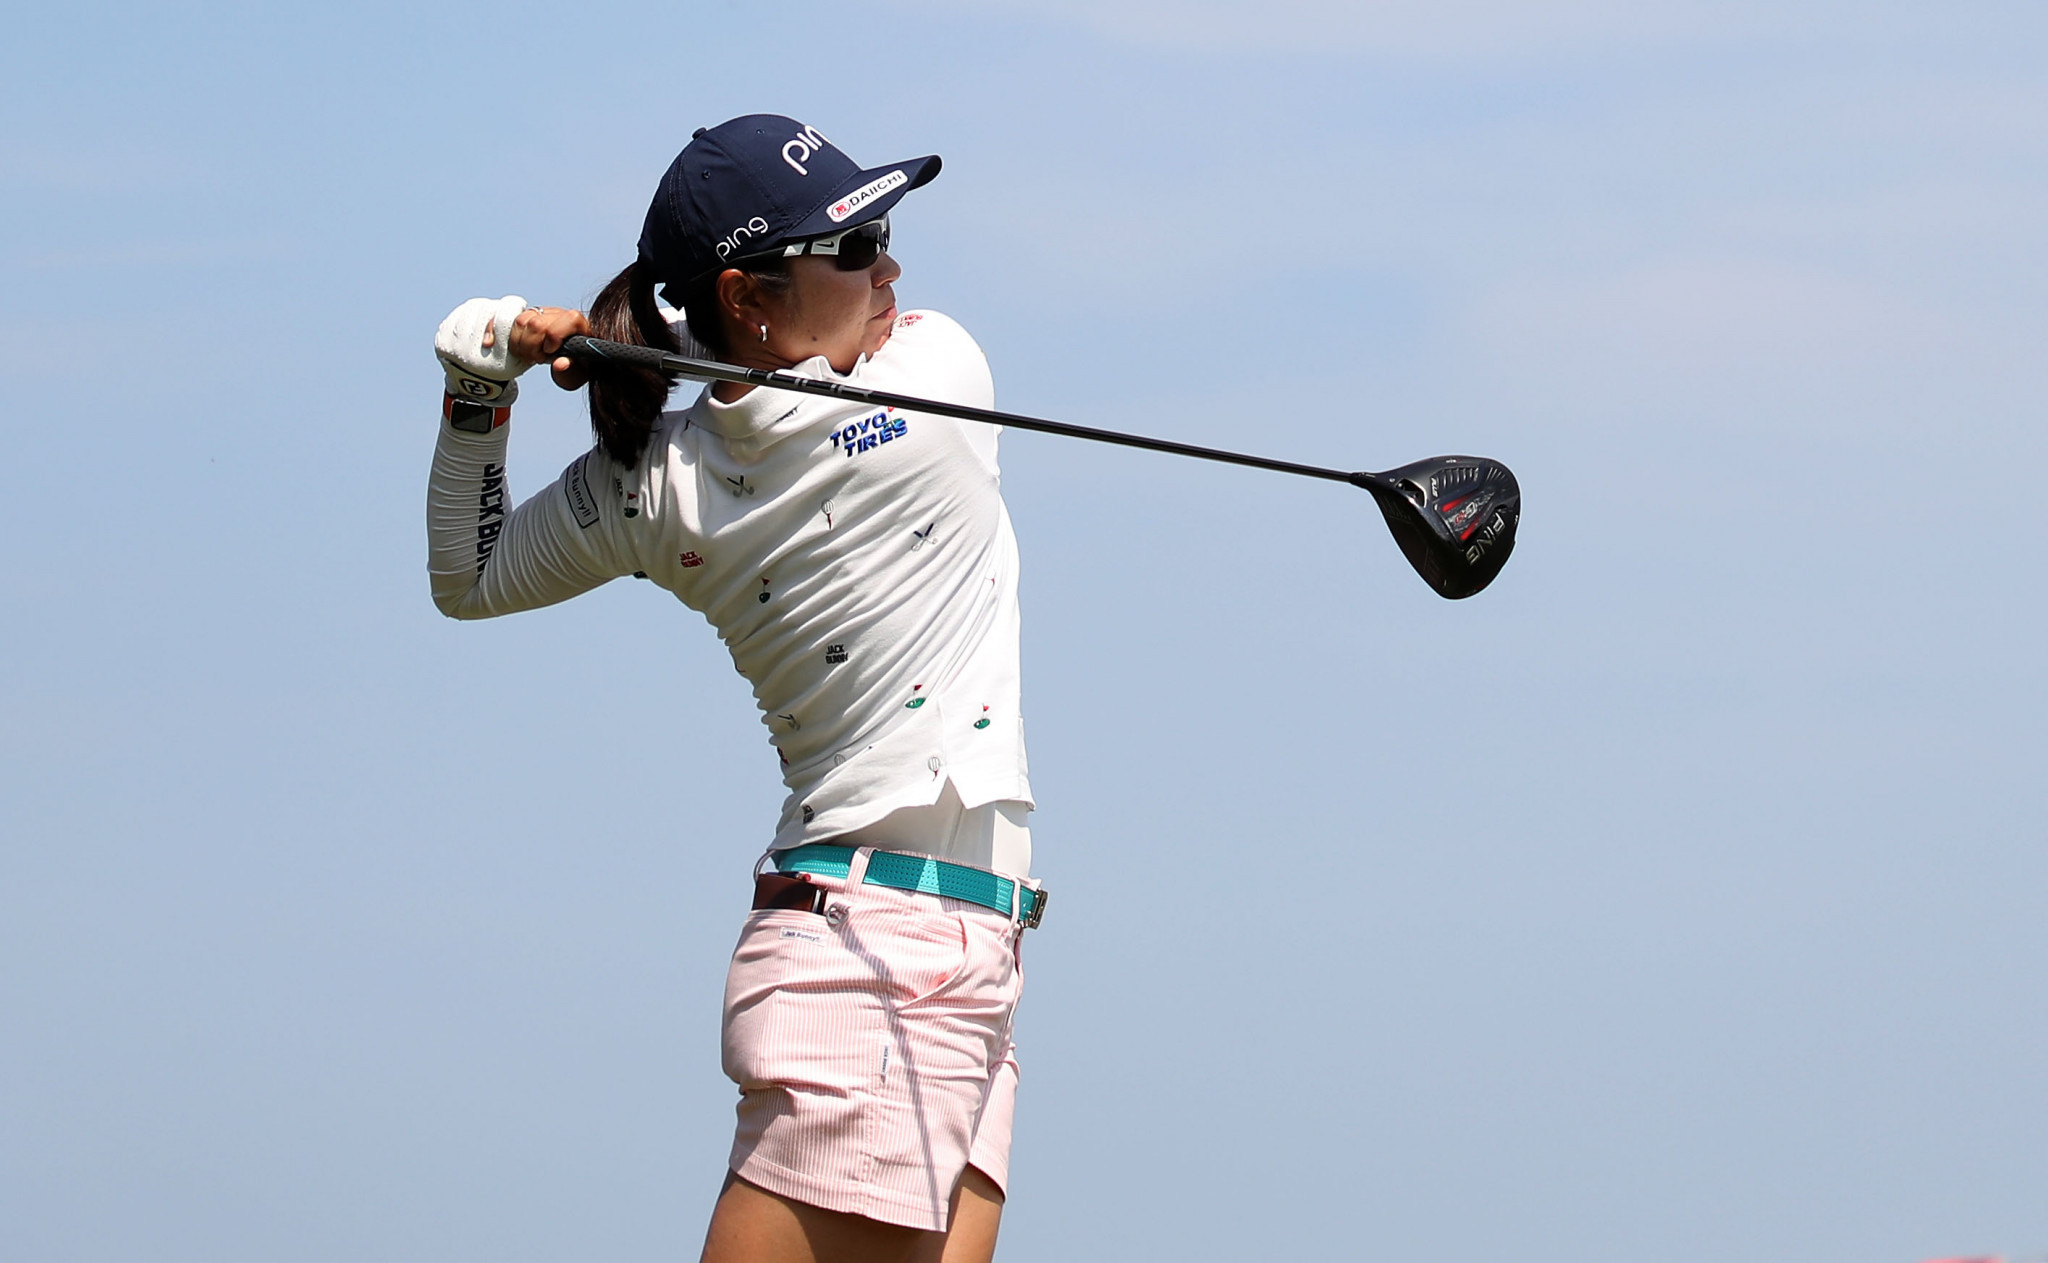 Japan's Mamiko Higa leads the US Open after two rounds ©Getty Images